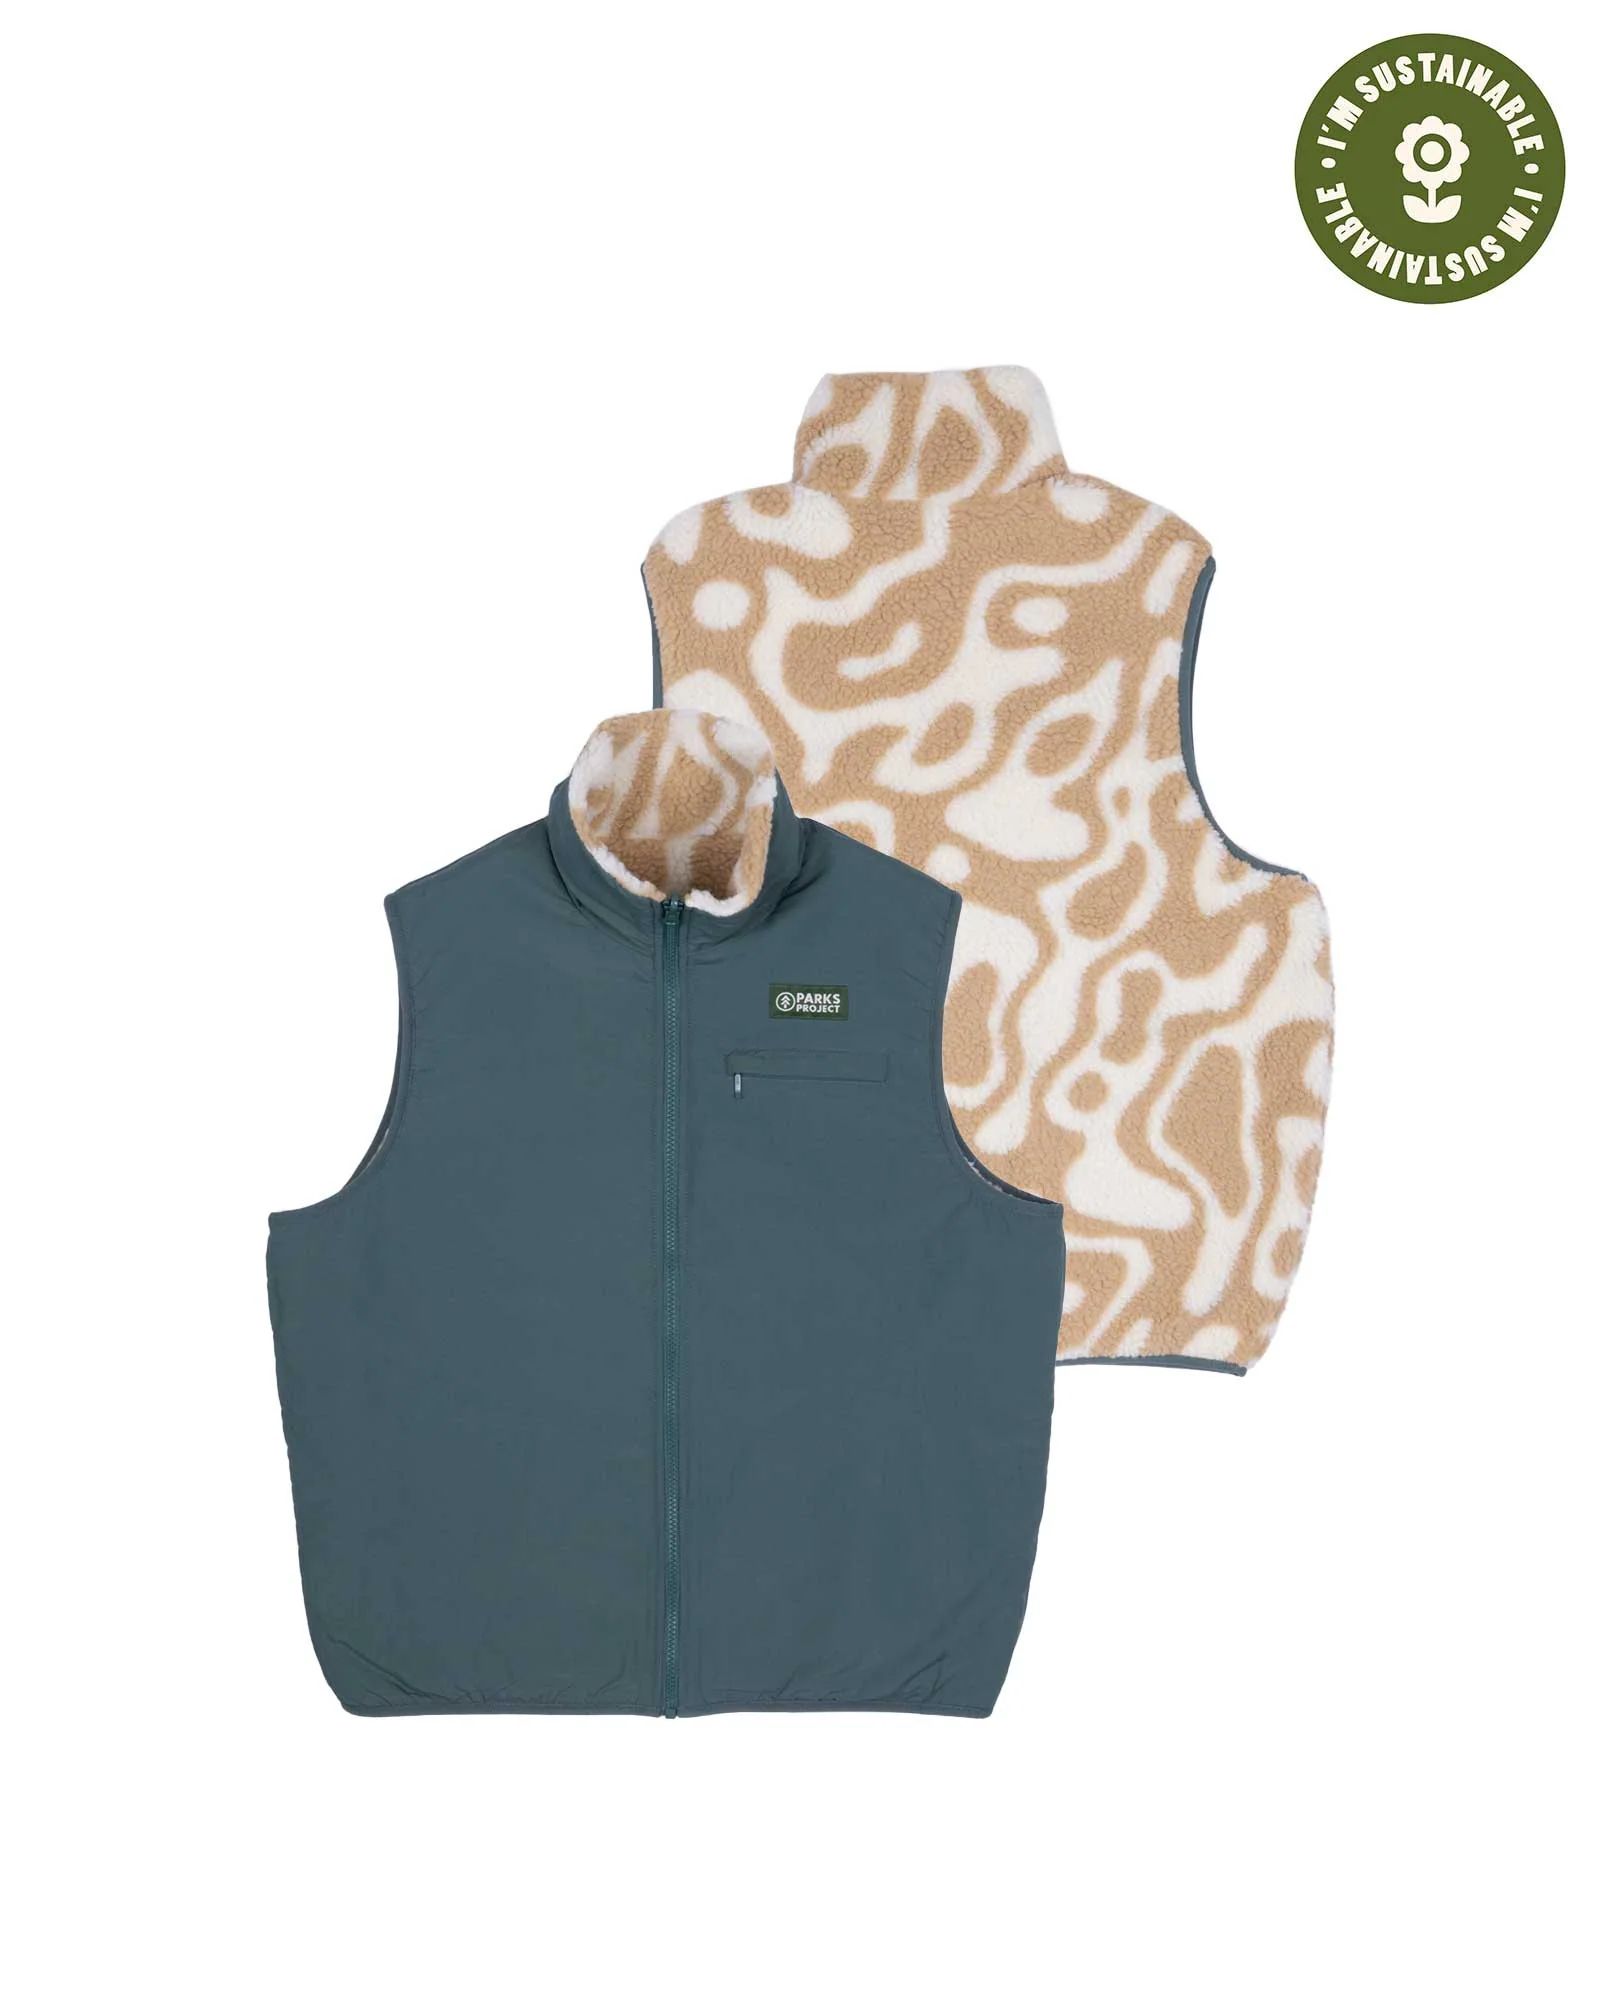 Yellowstone Geysers Reversible Vest | Parks Project